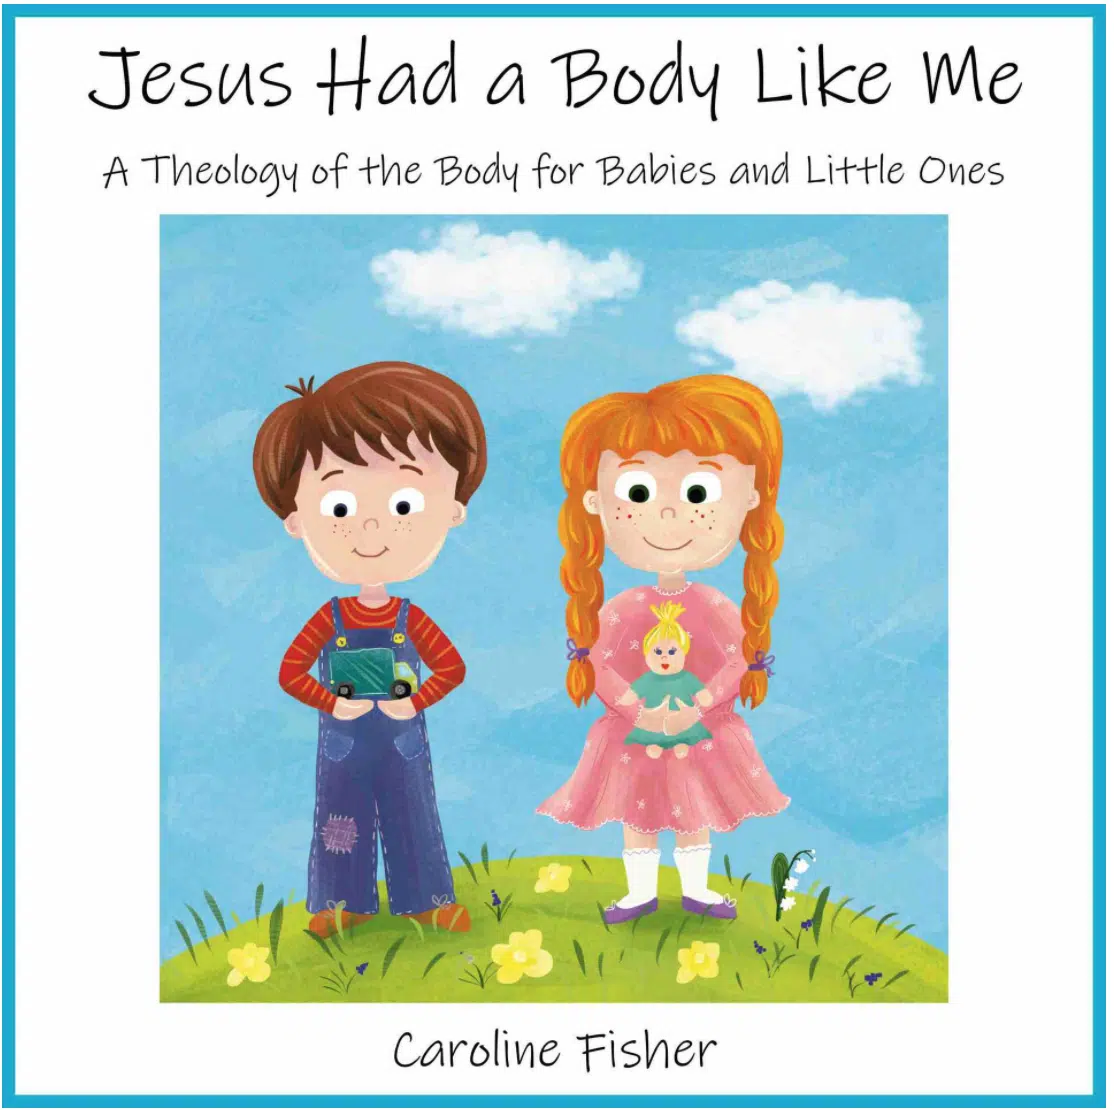 Jesus Had a Body Like Me, a book on theology of the body for kids